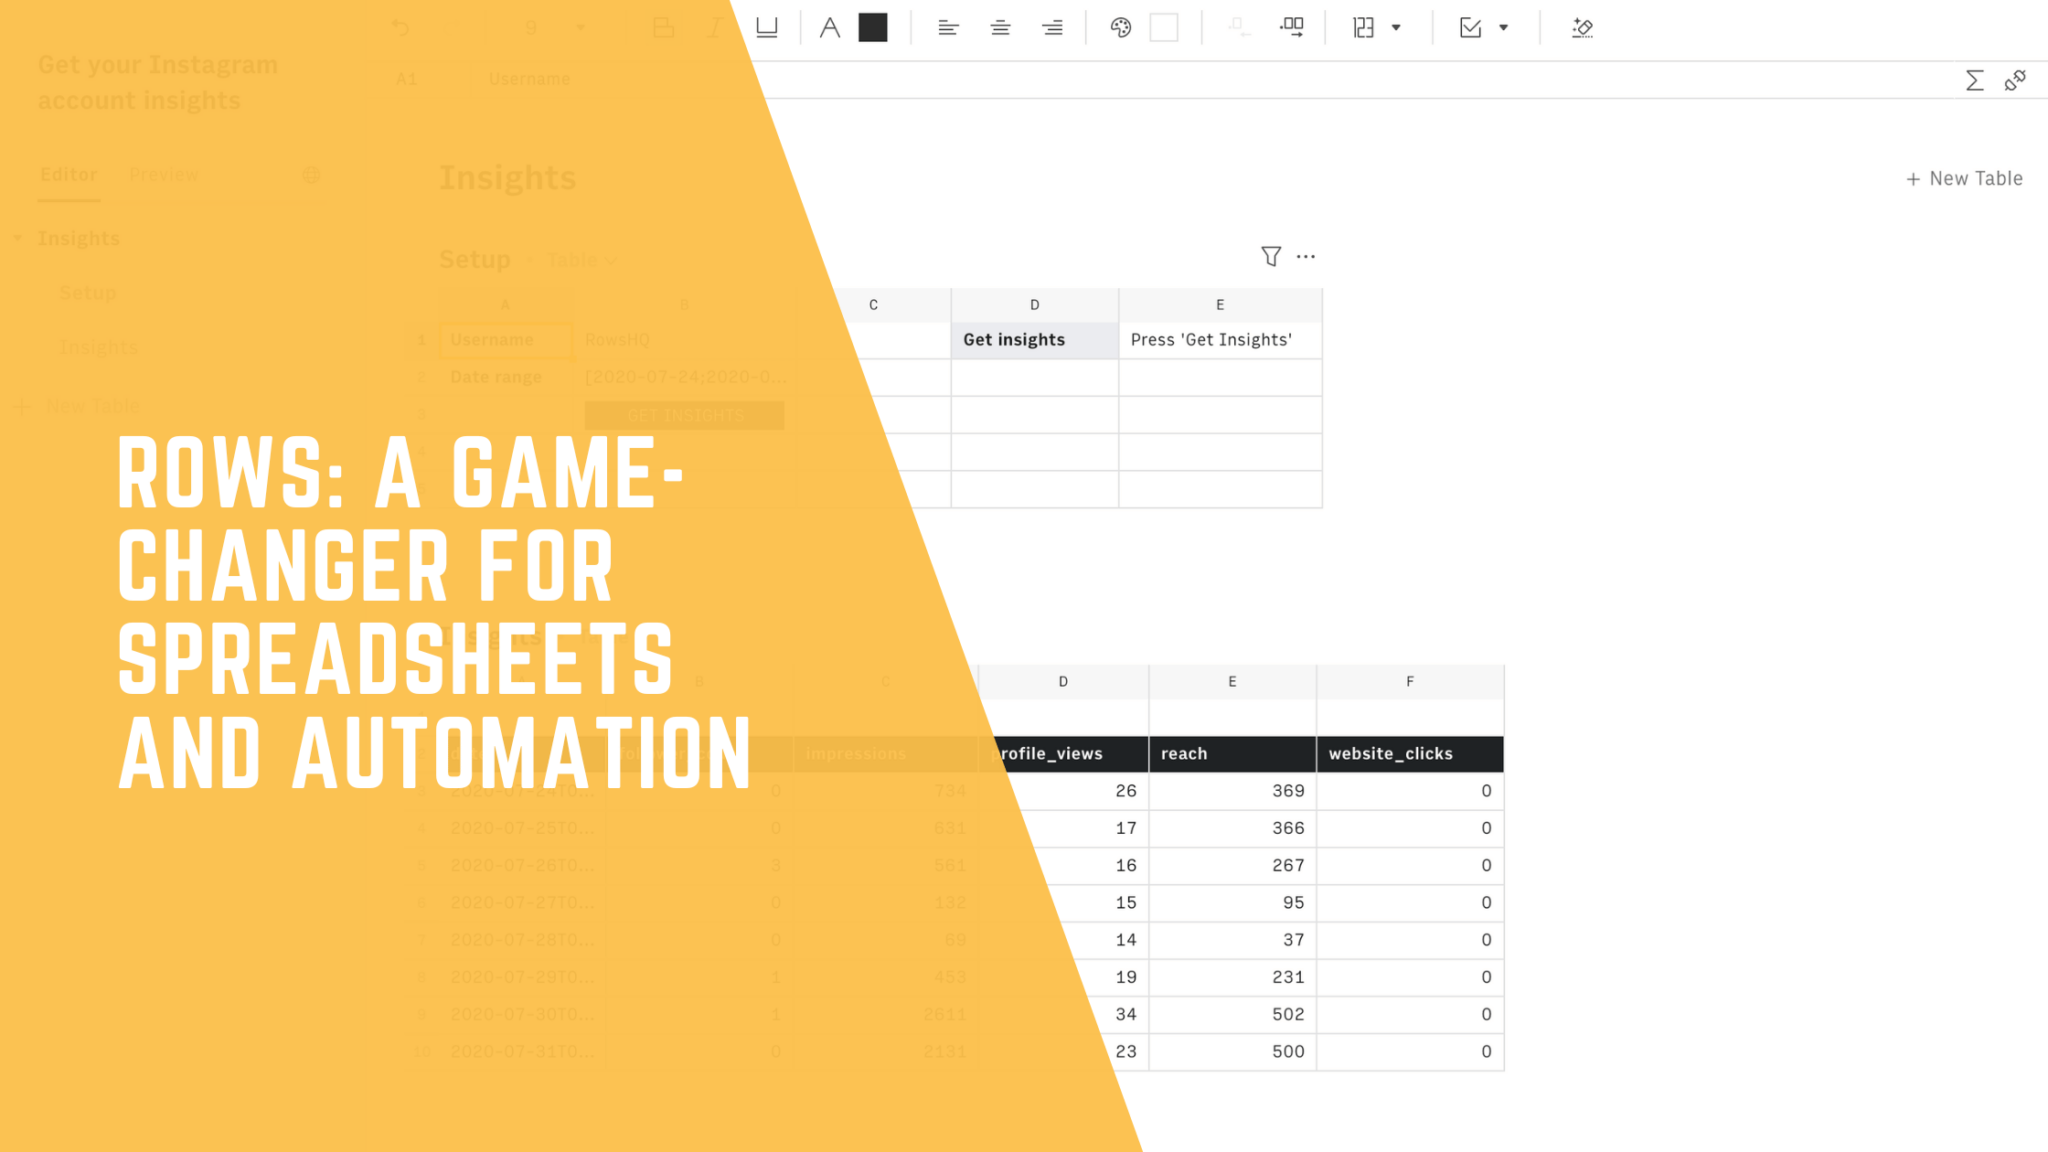 Rows A Game Changer for Spreadsheets and Automation